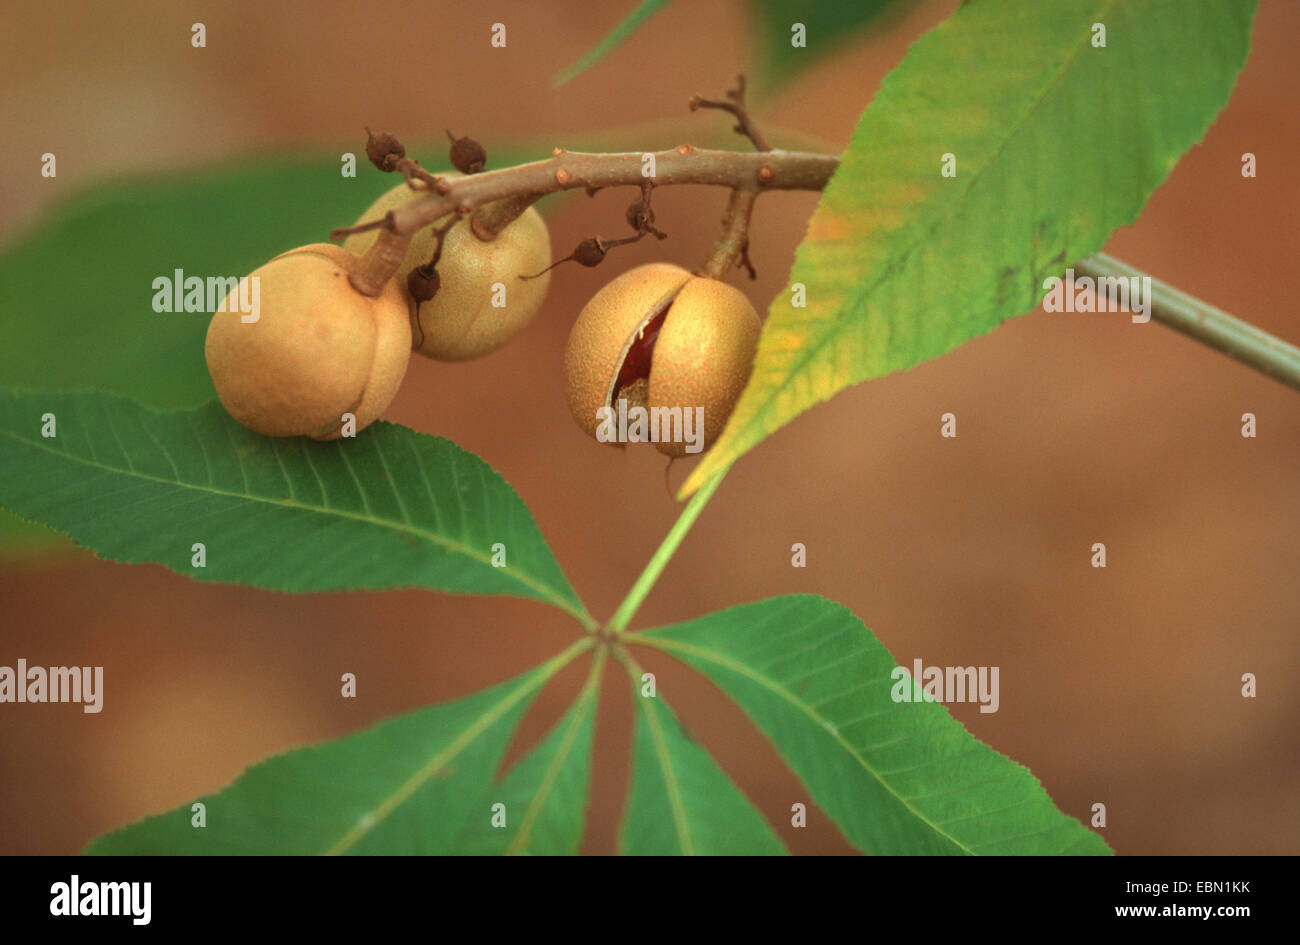 yellow buckeye (Aesculus flava, Aesculus octandra), fruits on a branch Stock Photo